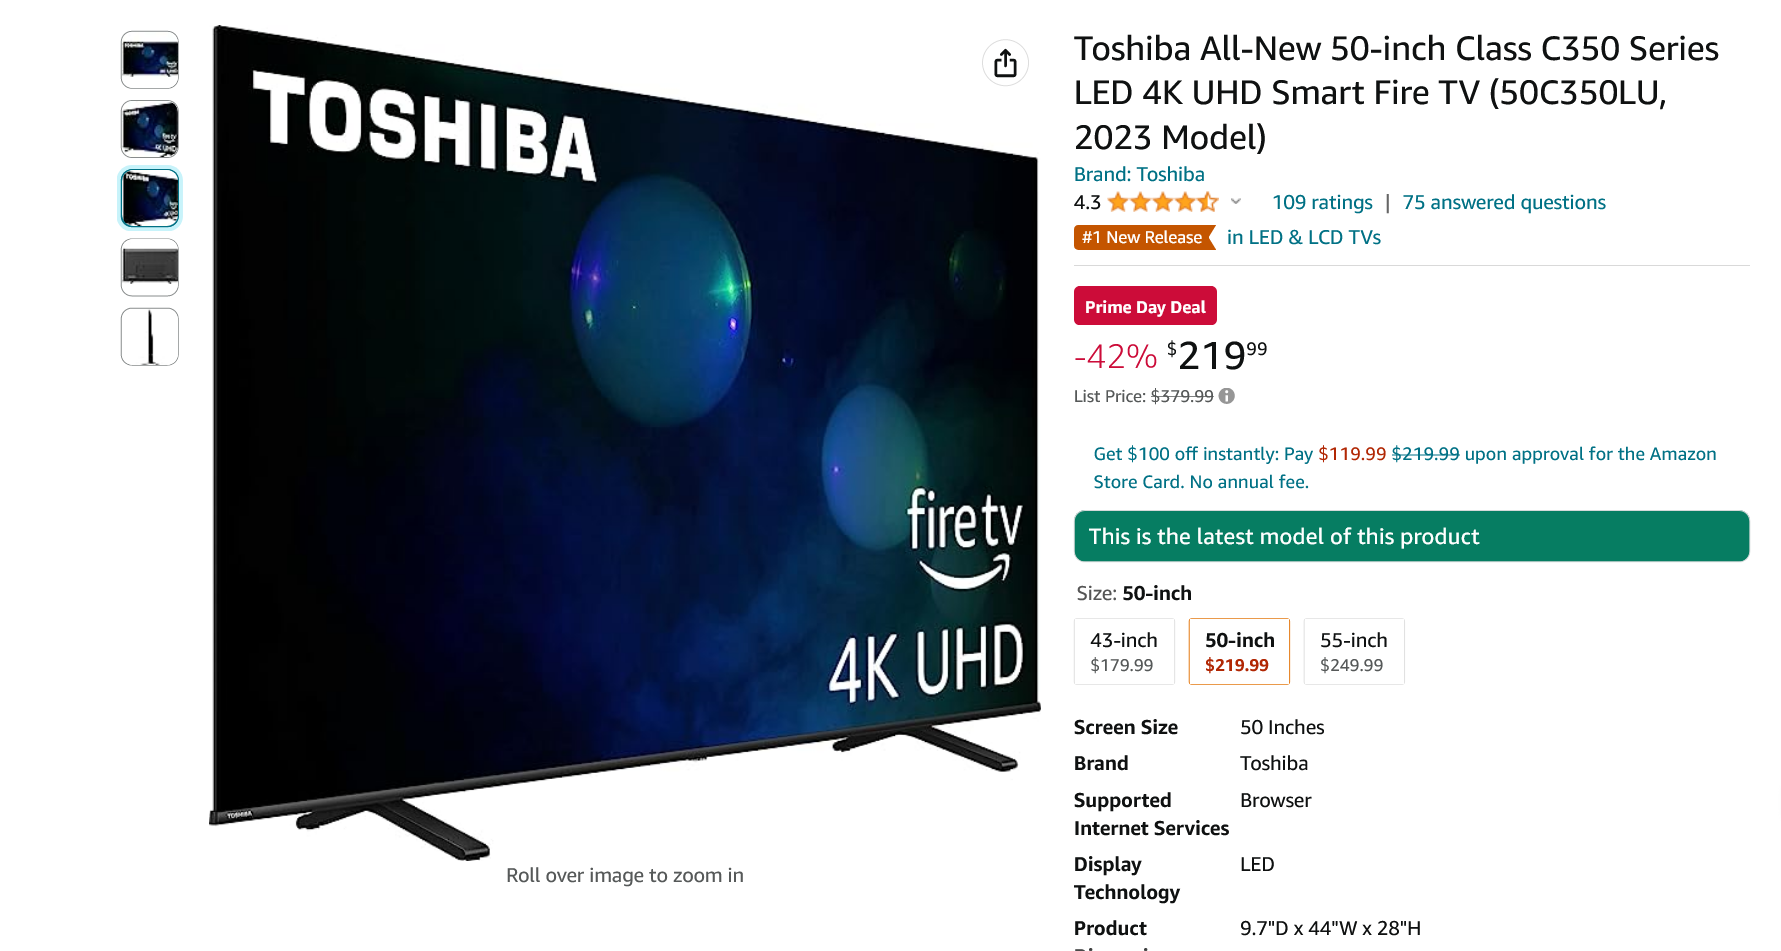 Screenshot 2023-07-11 at 13-07-07 Amazon.com Toshiba All-New 50-inch Class C350 Series LED 4K ...png